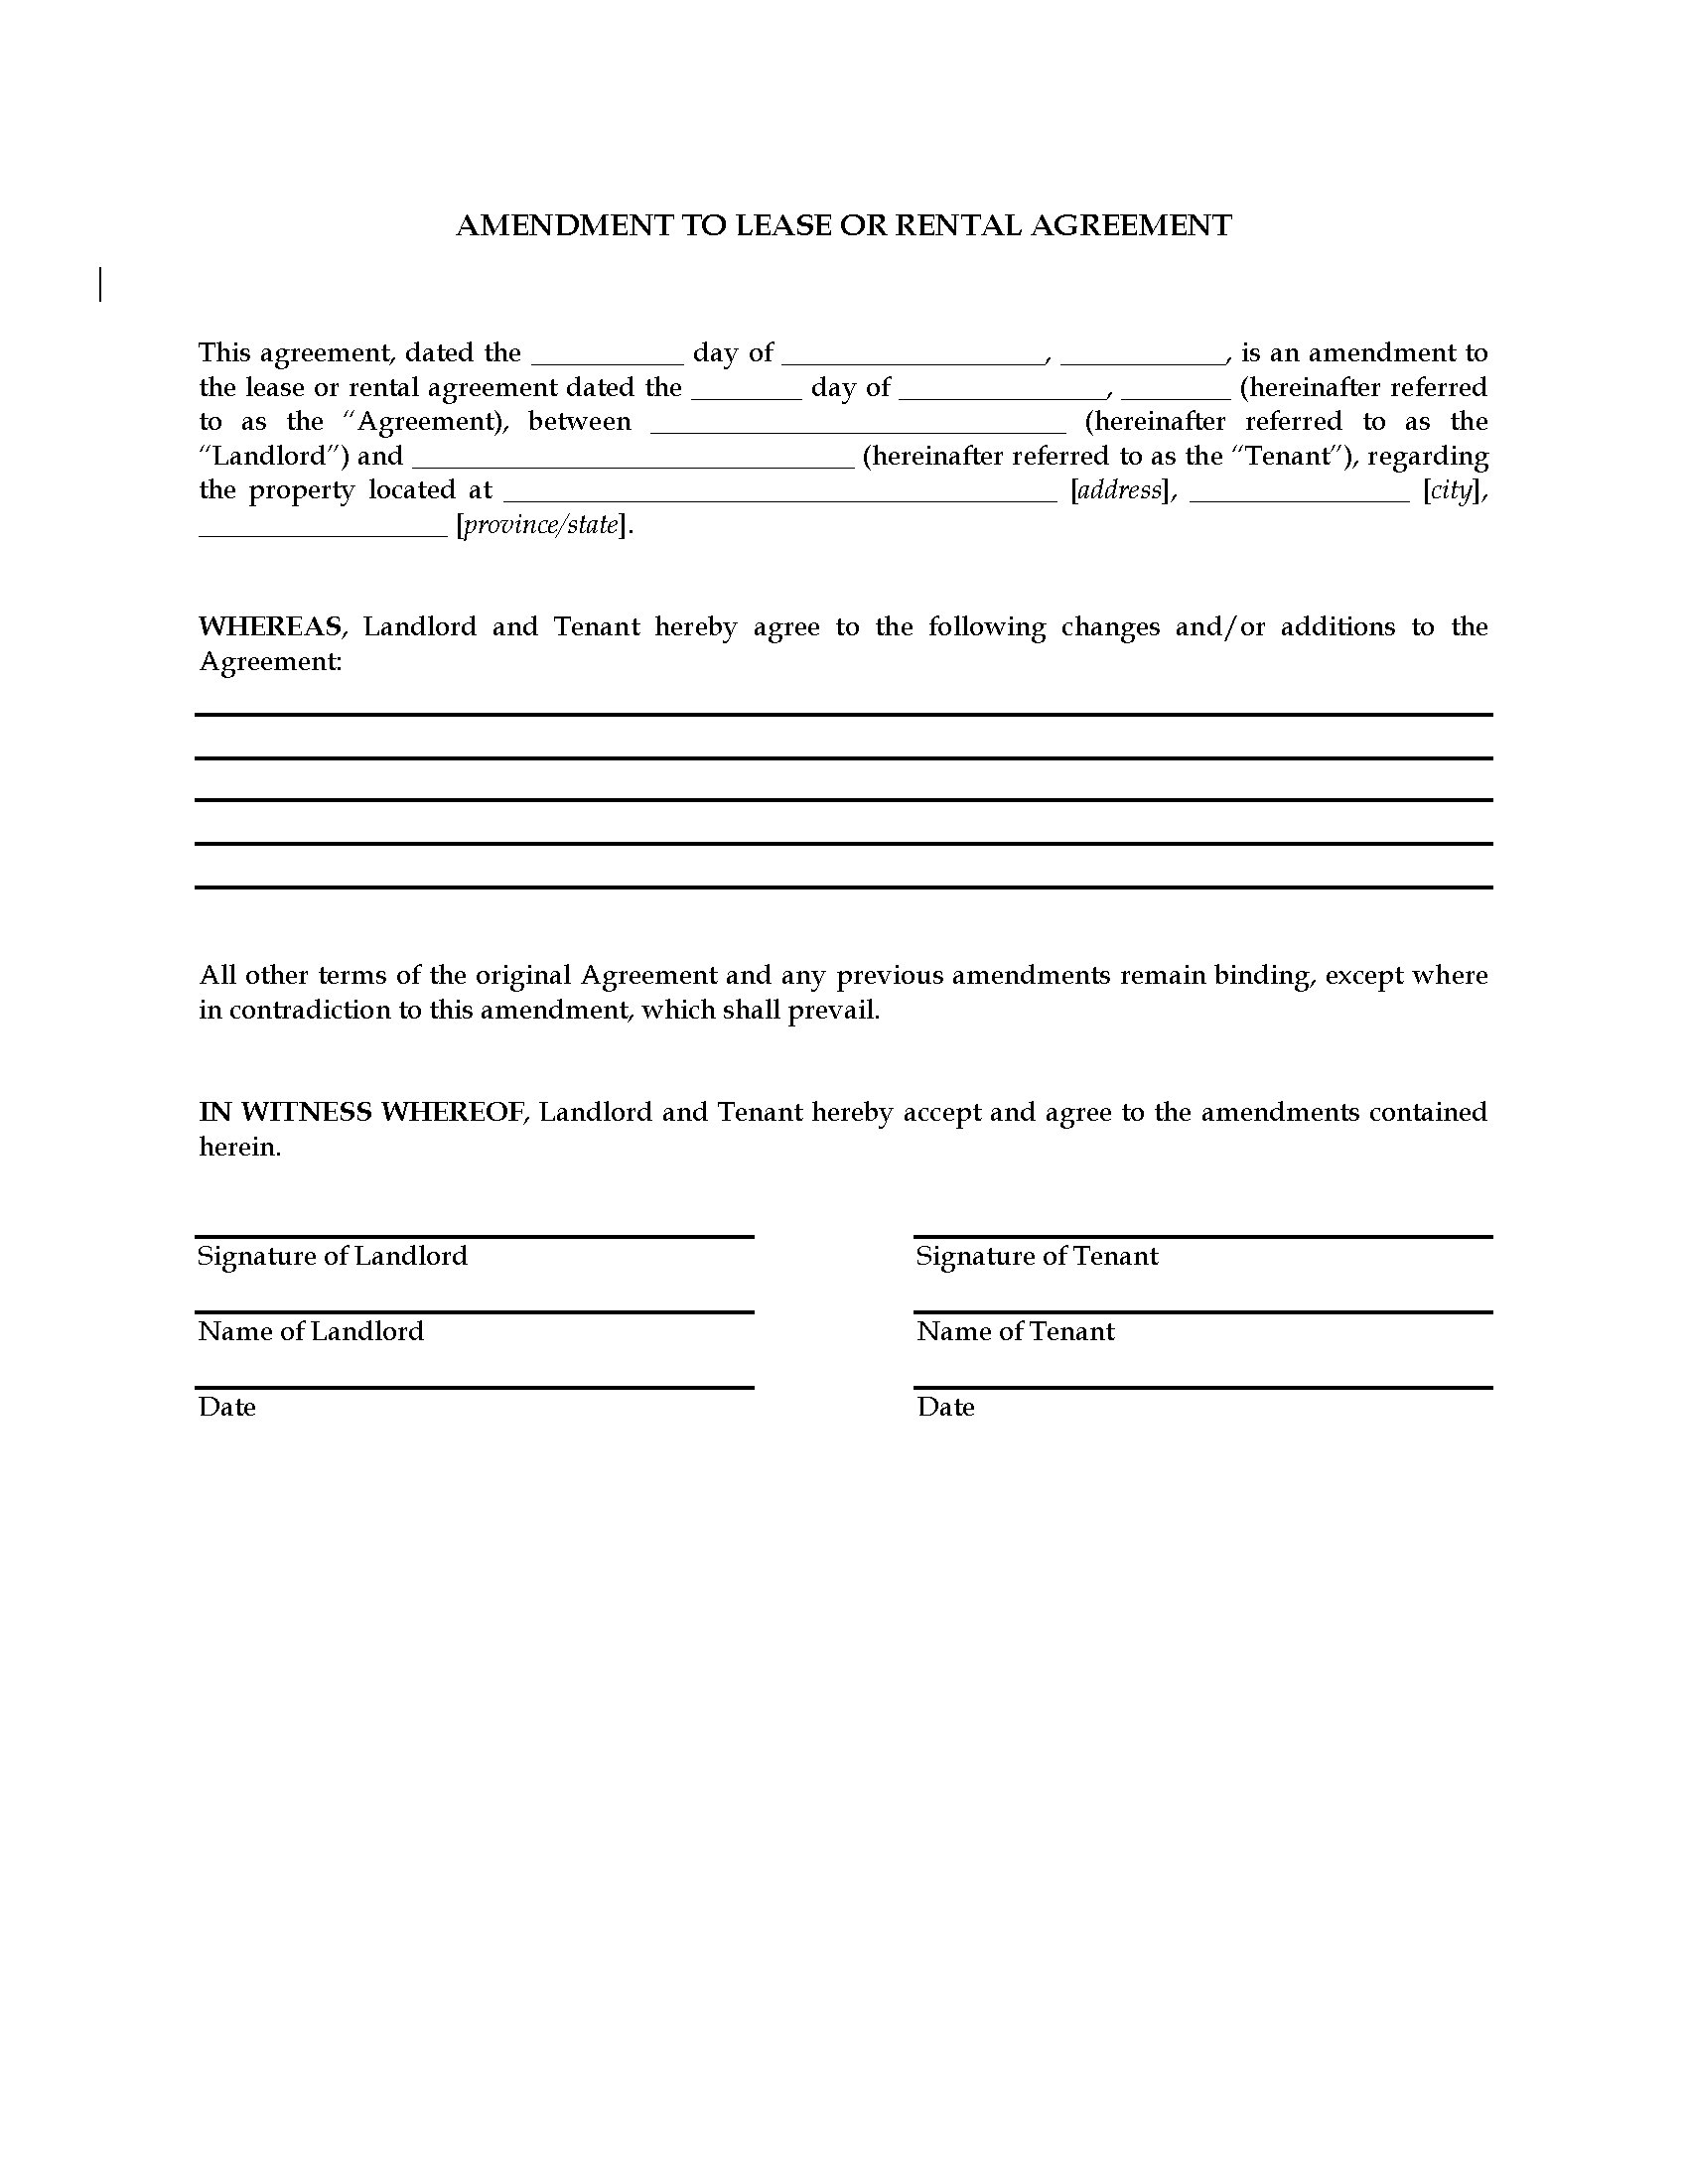 Legal Forms Lease Agreement Amendment To Lease Or Rental Agreement Legal Forms And Business